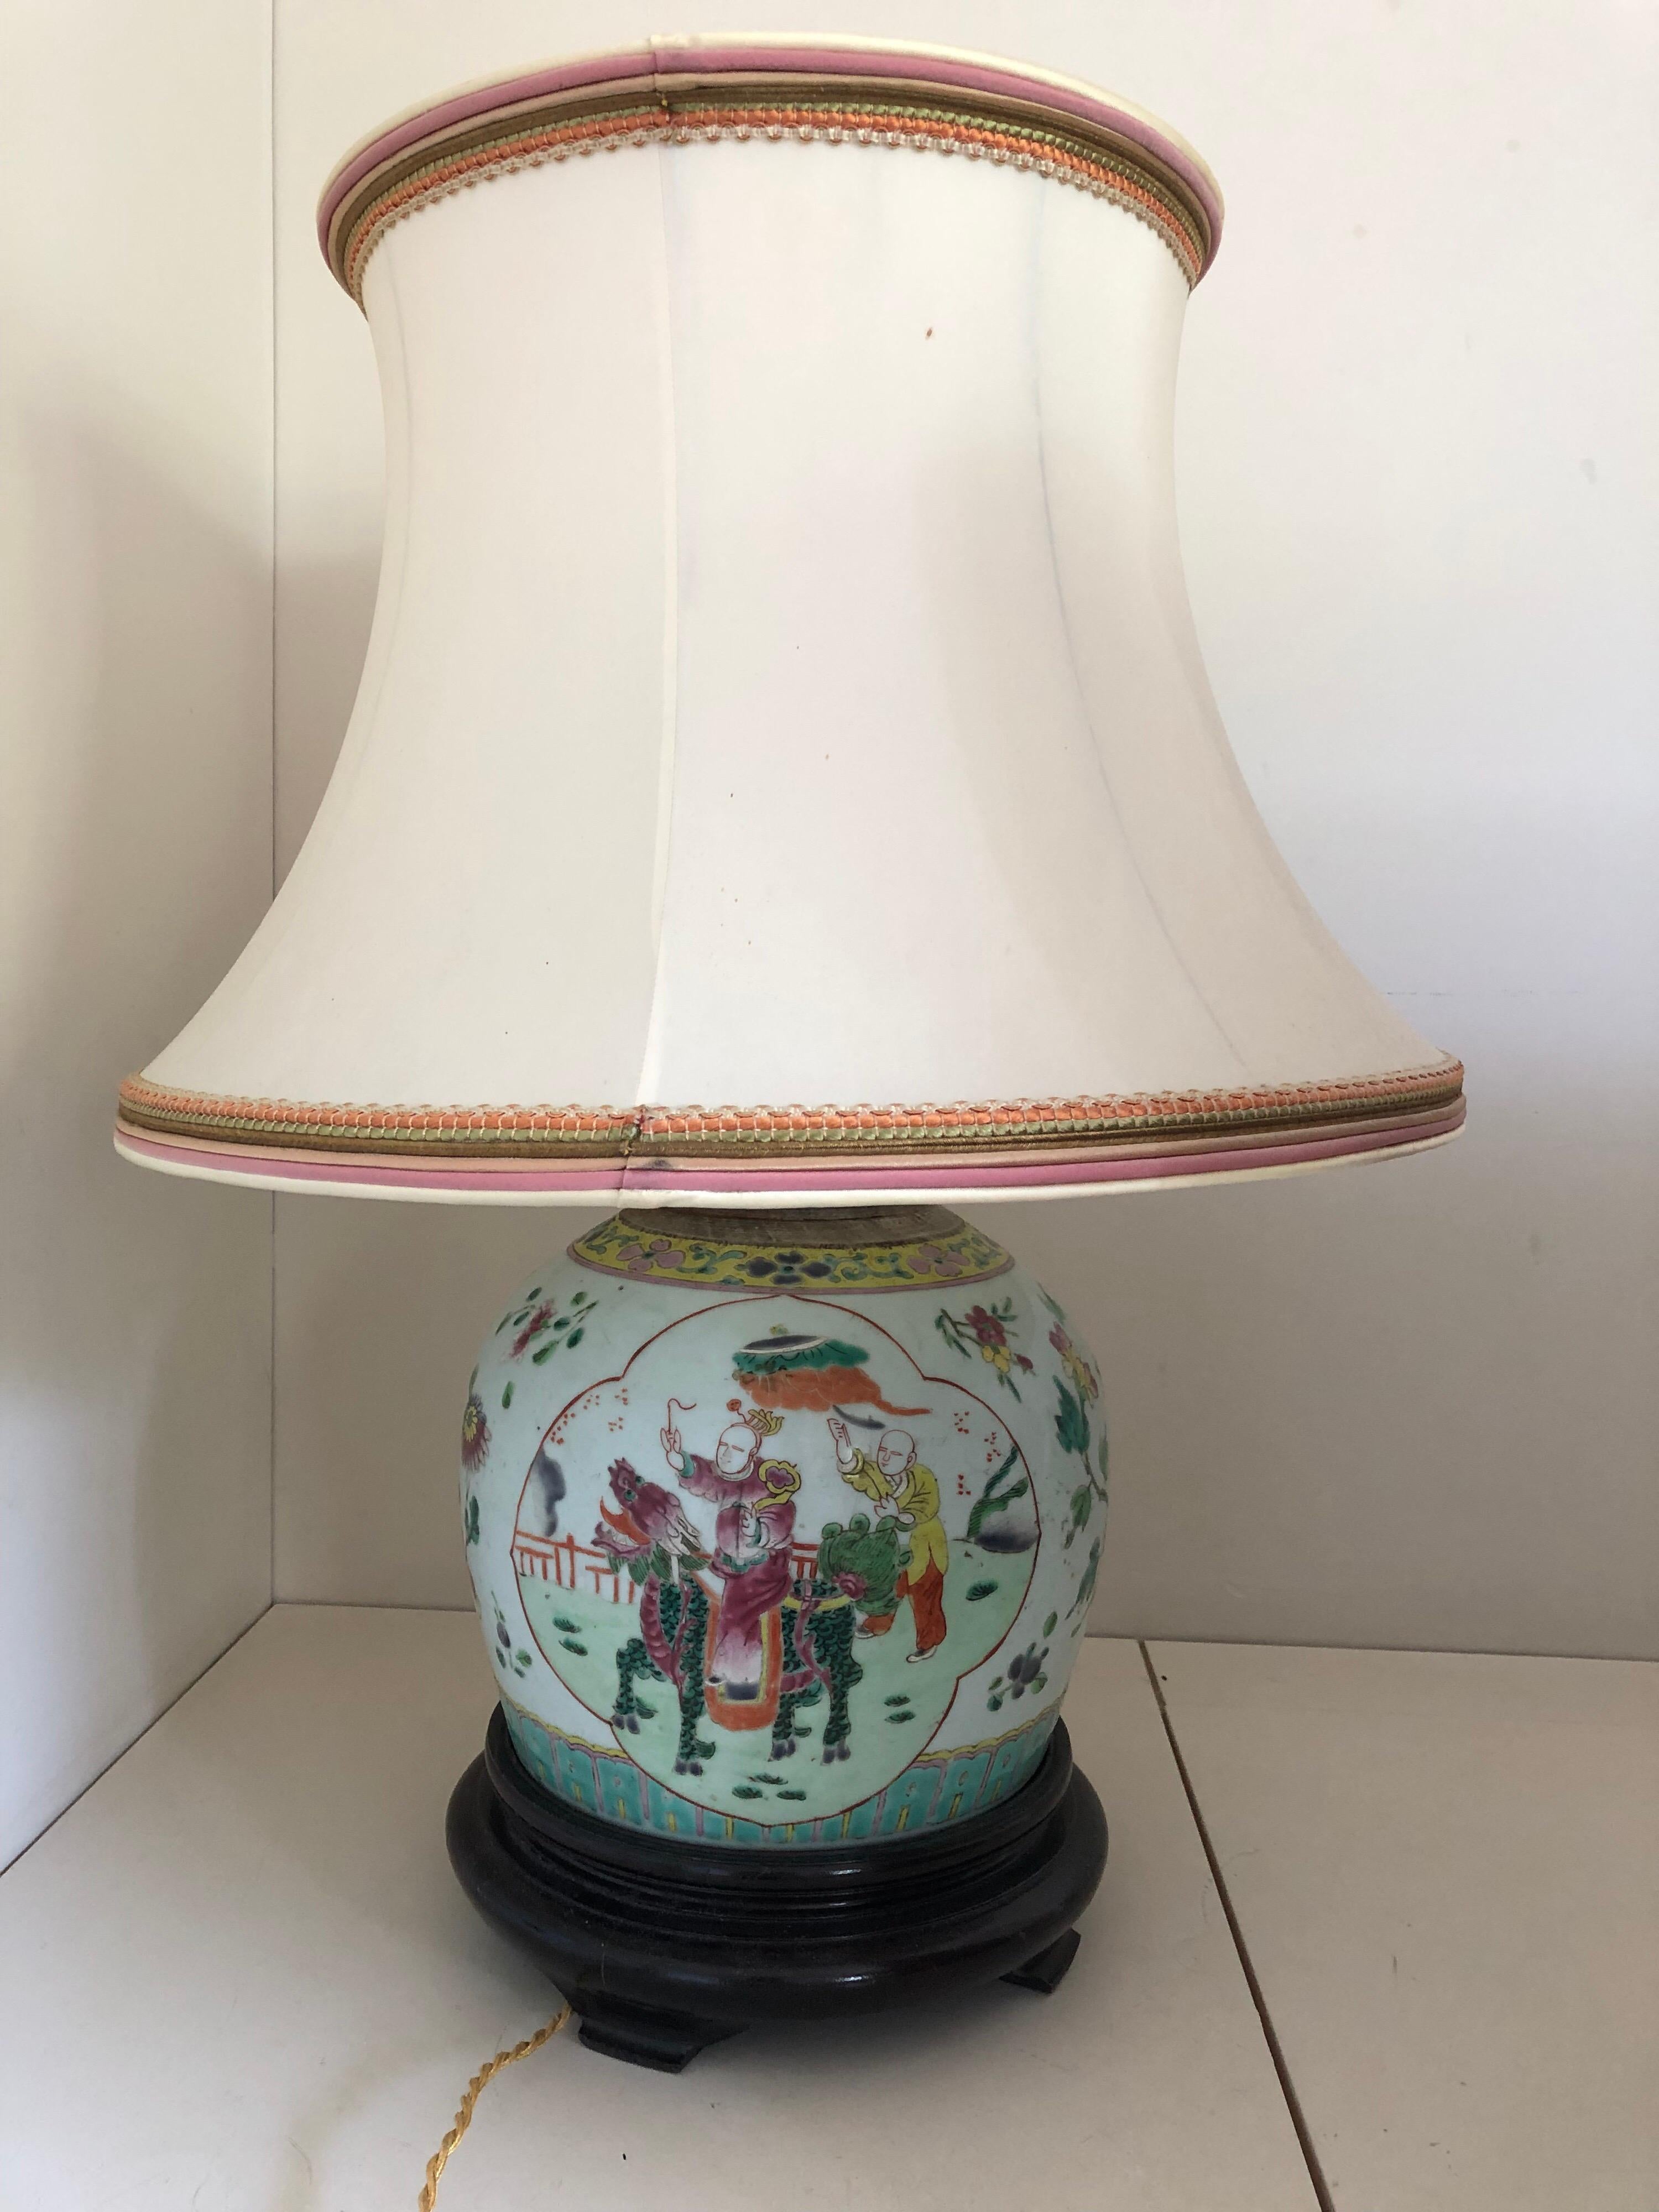 A very fine 19th century Chinese lamp with a dragon beautiful scene. Decorated with chinoiserie floral landscape. Now mounted as a lamp with wooden base.
There is a second one with another scene.